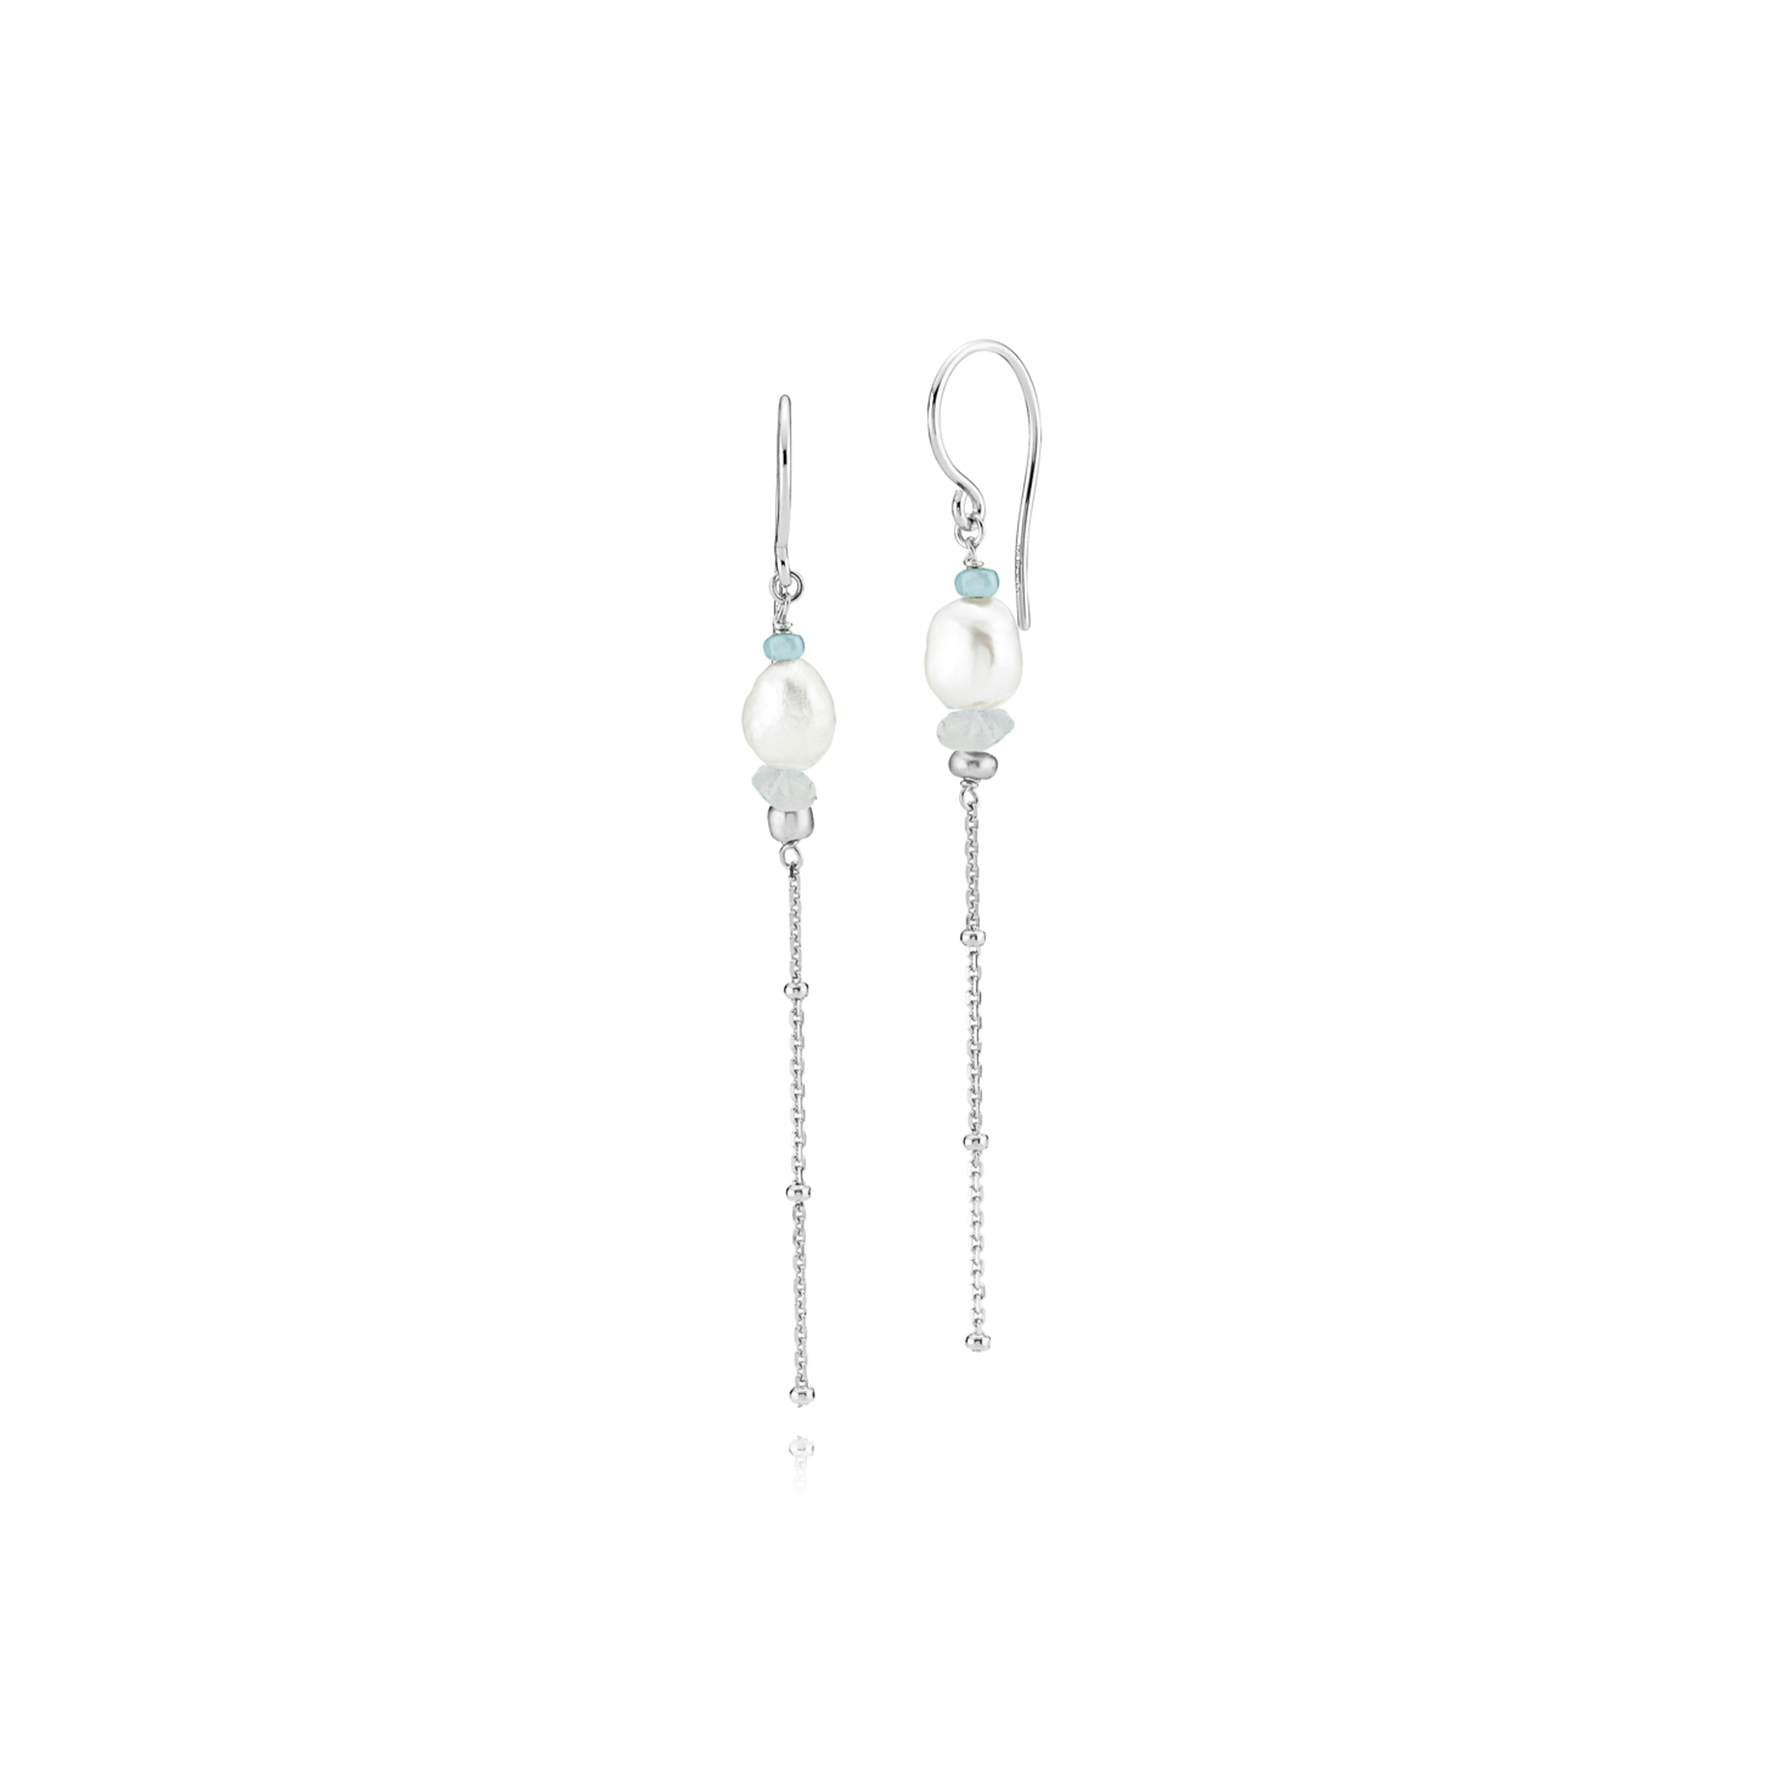 Beach Earrings Blue With Pearl from Sistie in Silver Sterling 925